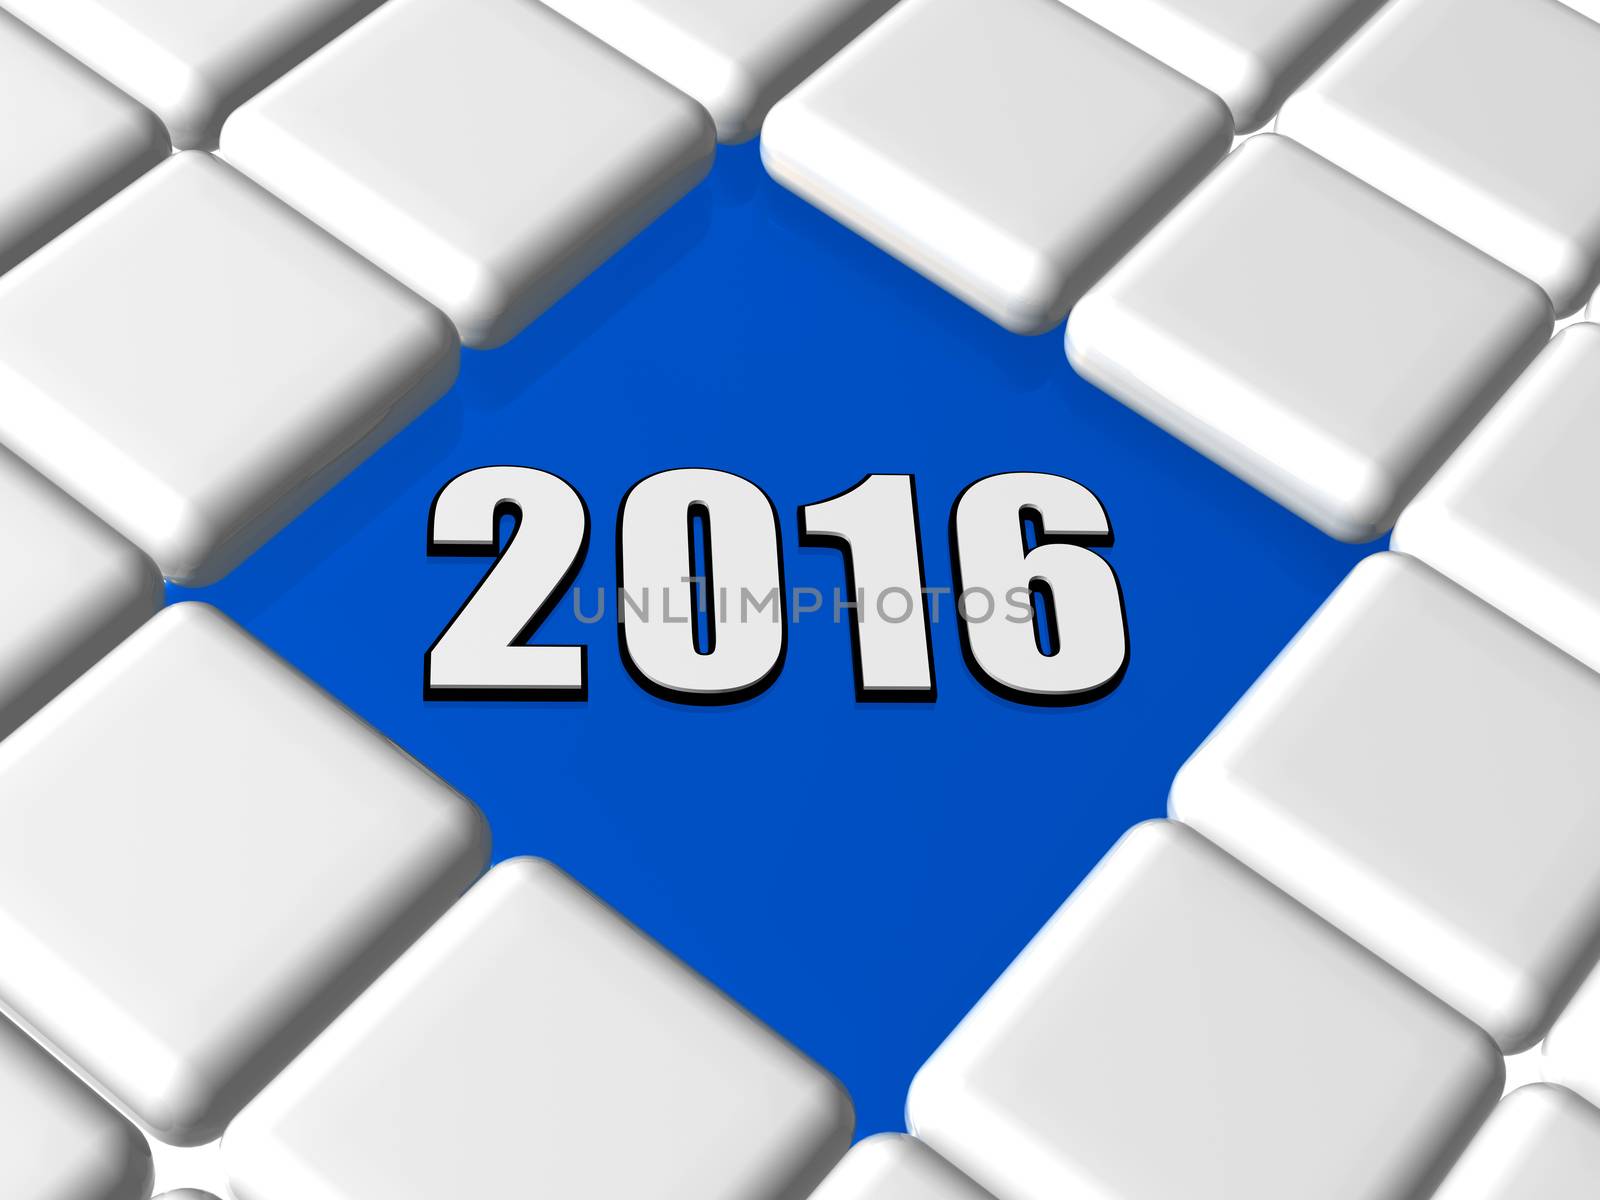 3d ciphers 2016 over blue between grey boxes, holiday new year concept